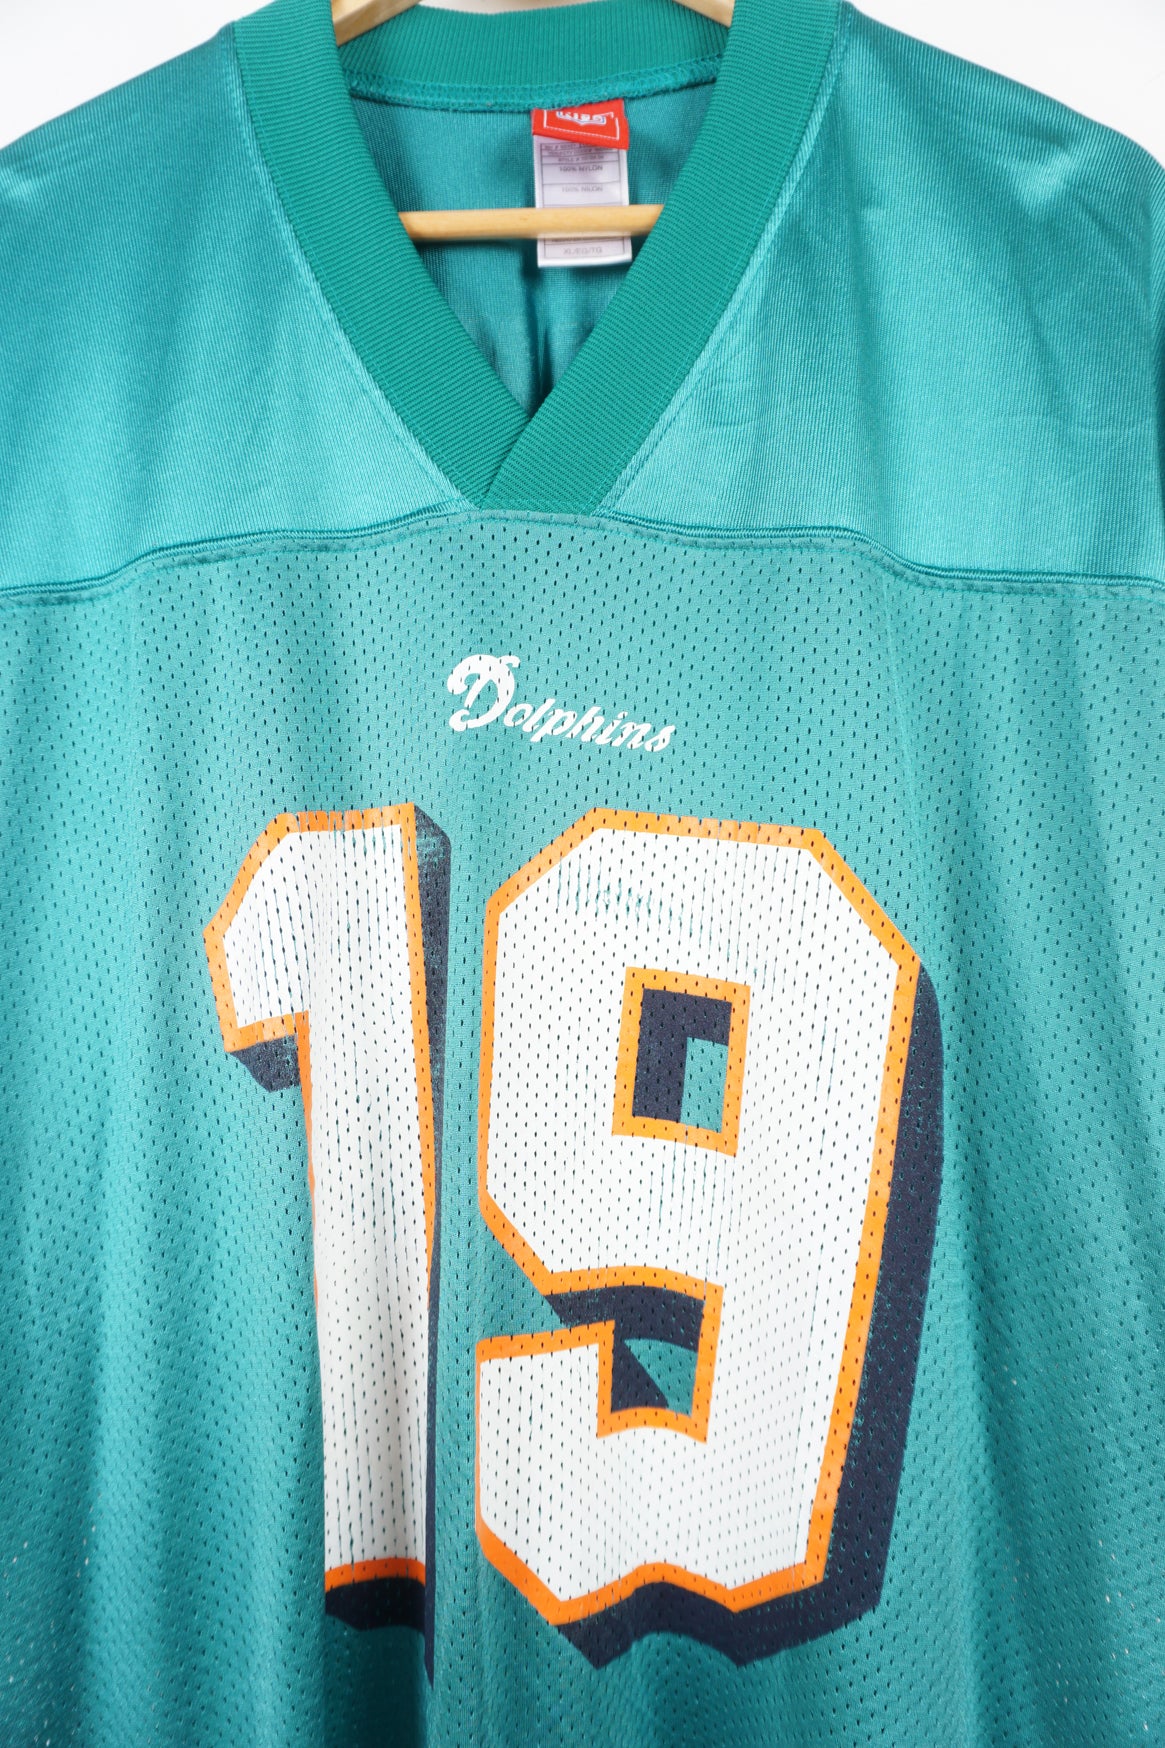 Miami Dolphins NFL Jersey